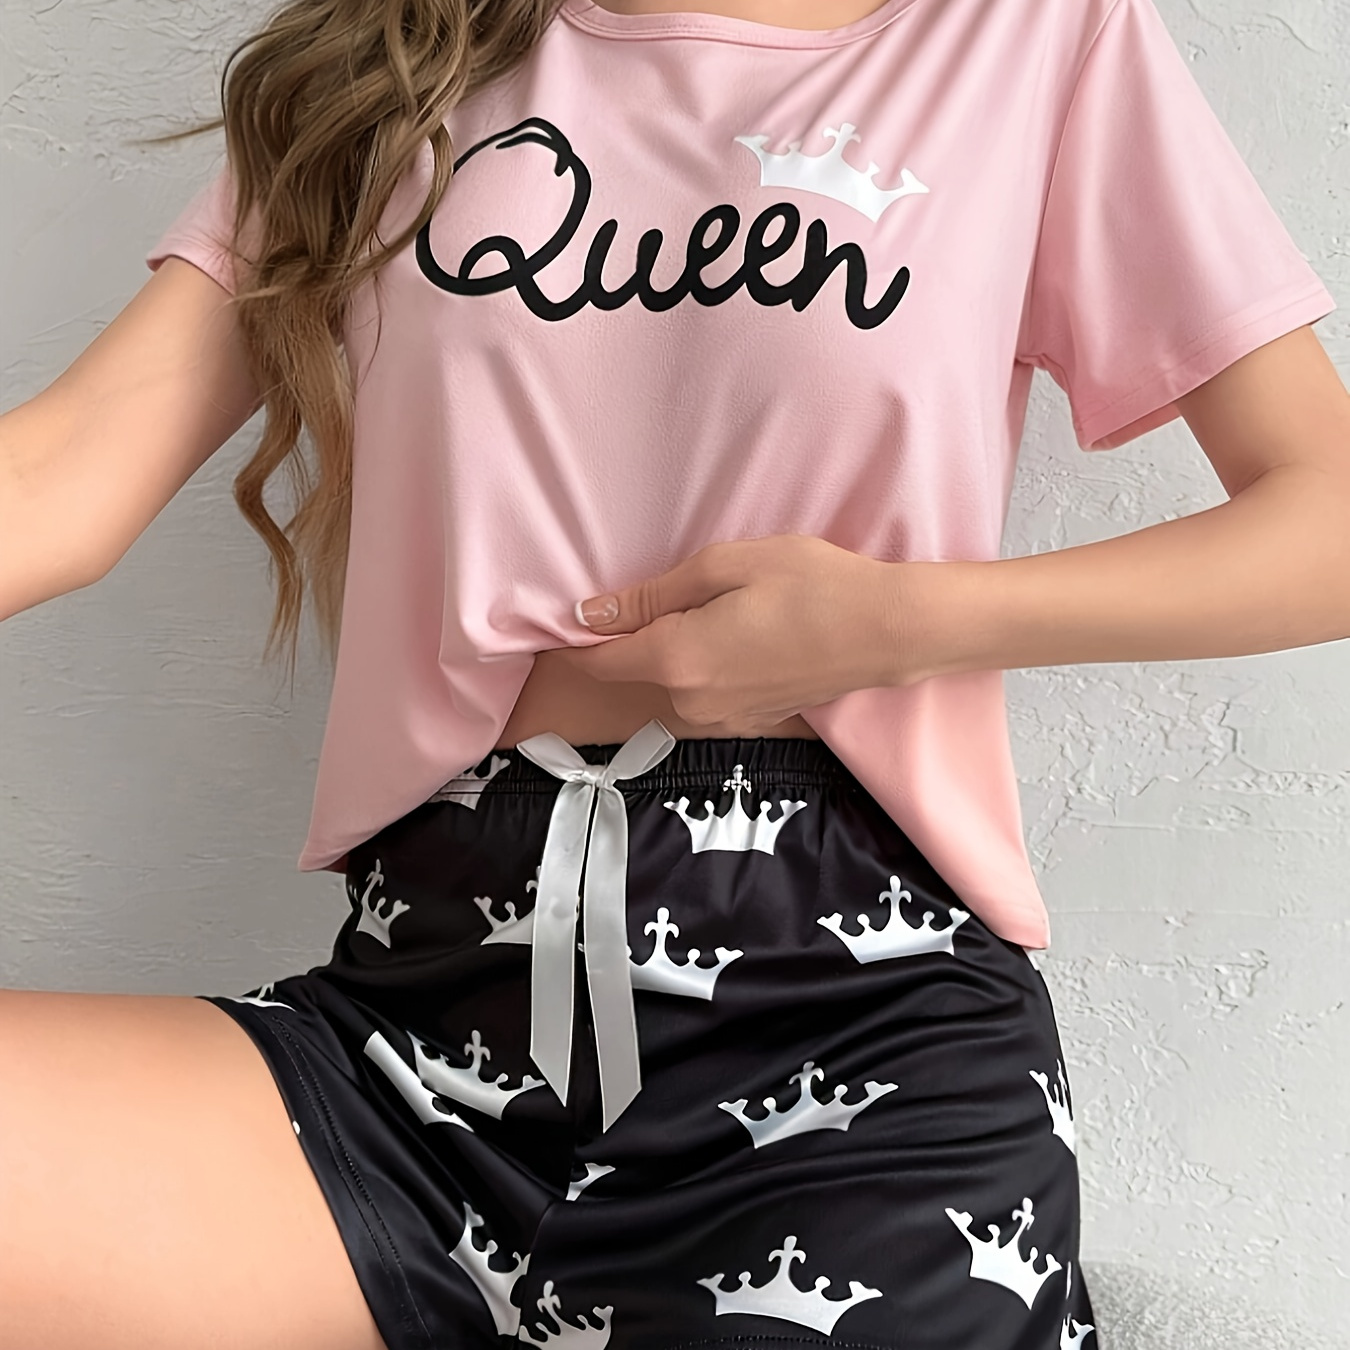 

Crown & Letter Print Pajama Set, Casual Short Sleeve Round Neck Top & Bow Shorts, Women's Sleepwear